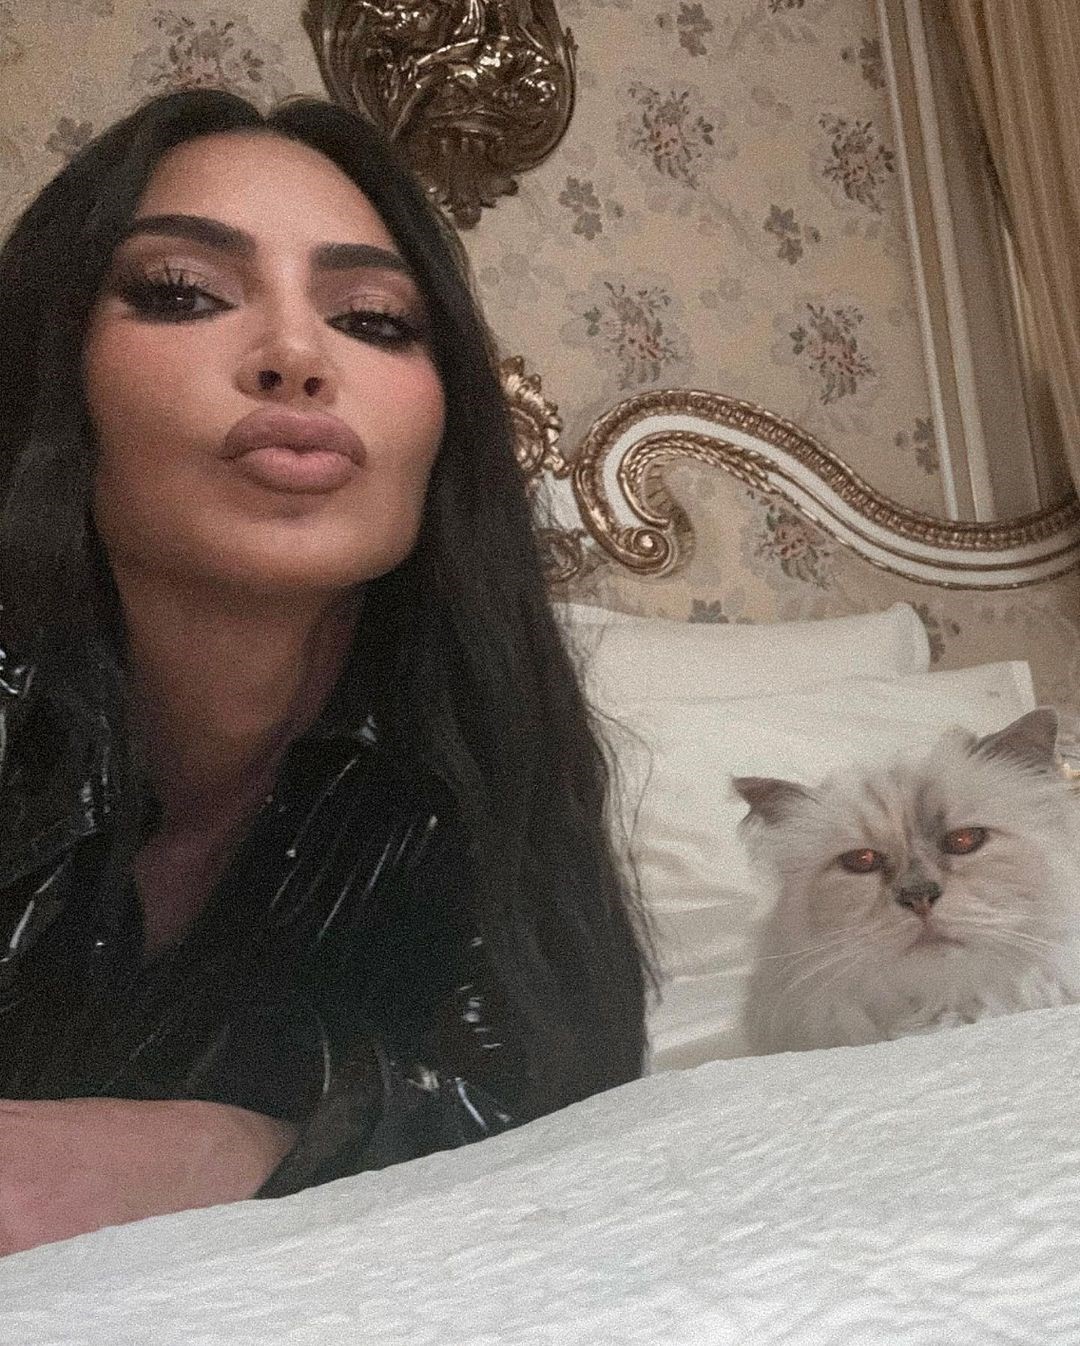 Karl Lagerfeld's cat, Choupette, stars in Vogue cover story